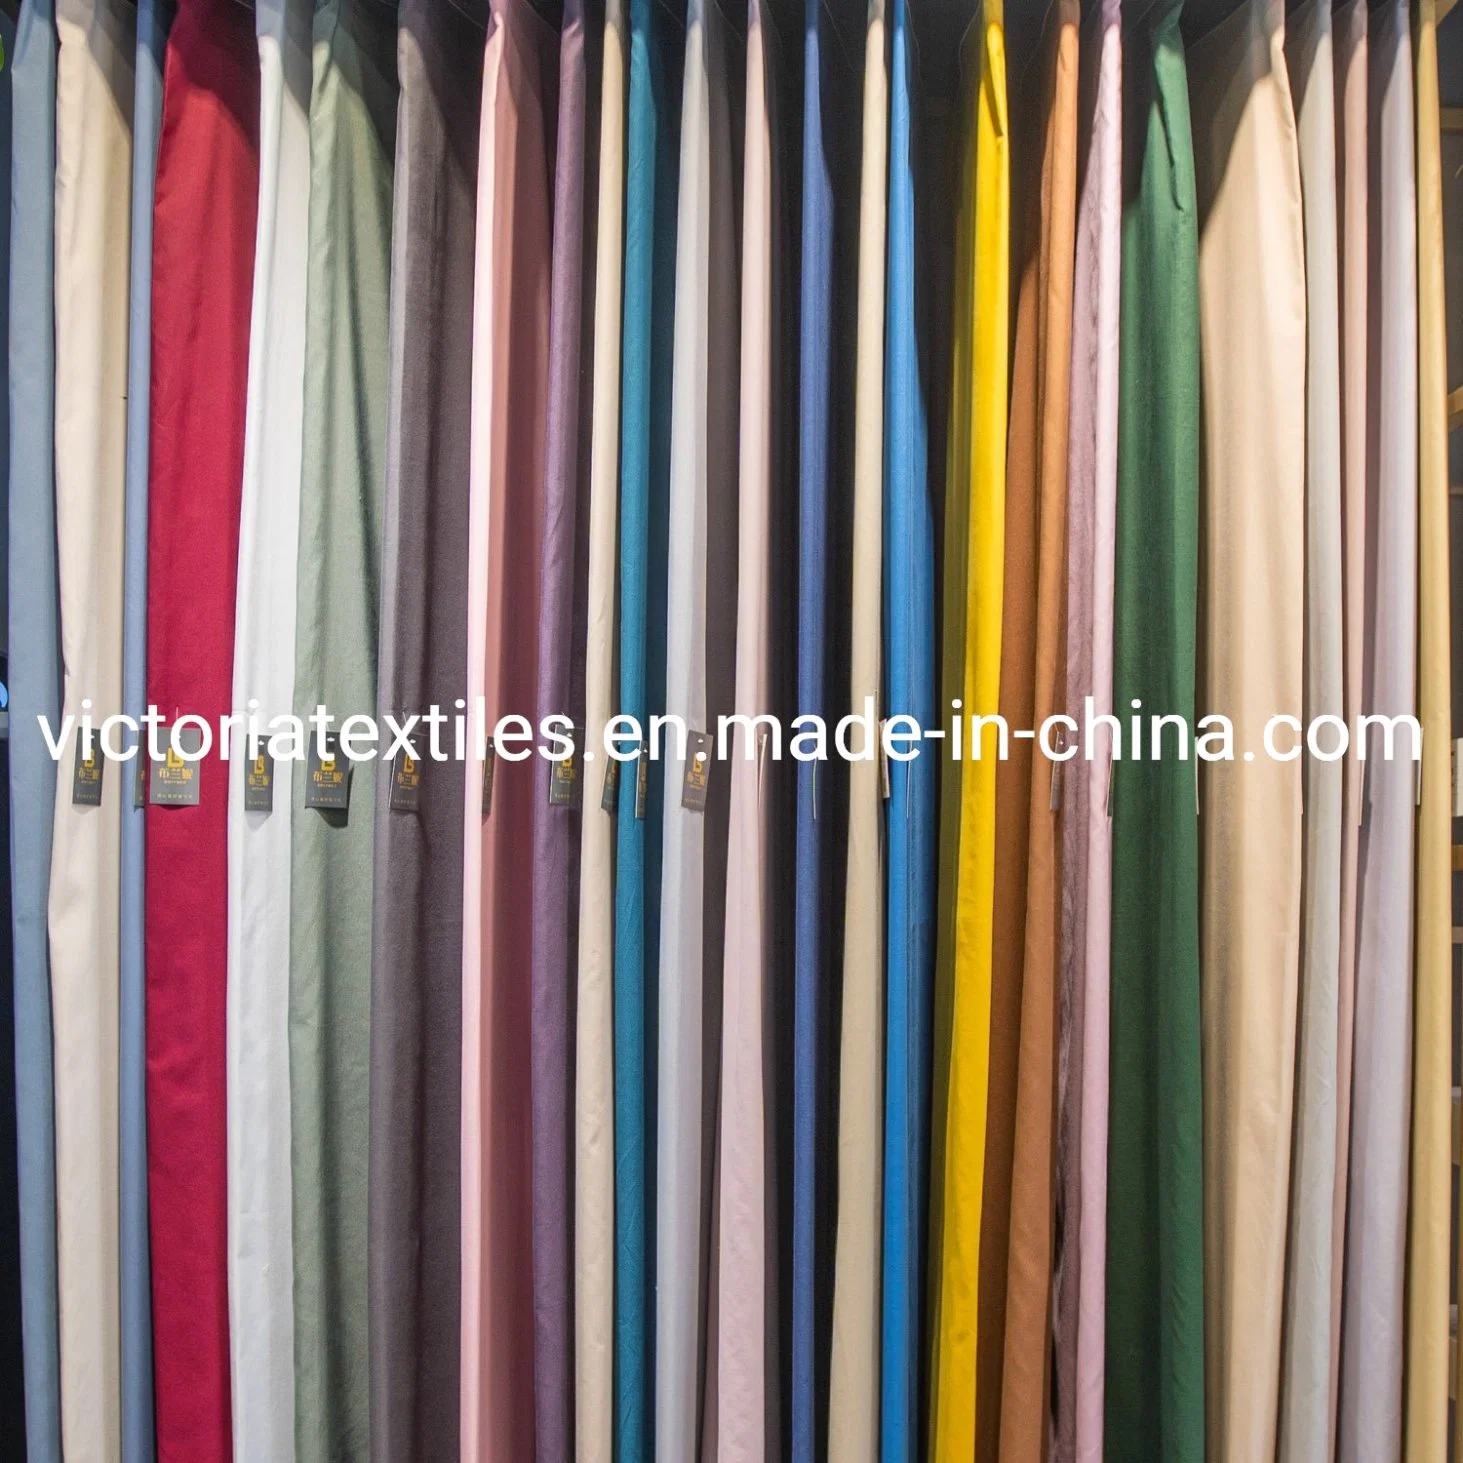 Polyester Dyed Microfiber Bedding Fabrics, Super Soft, Over Hundred Colors for Choose!